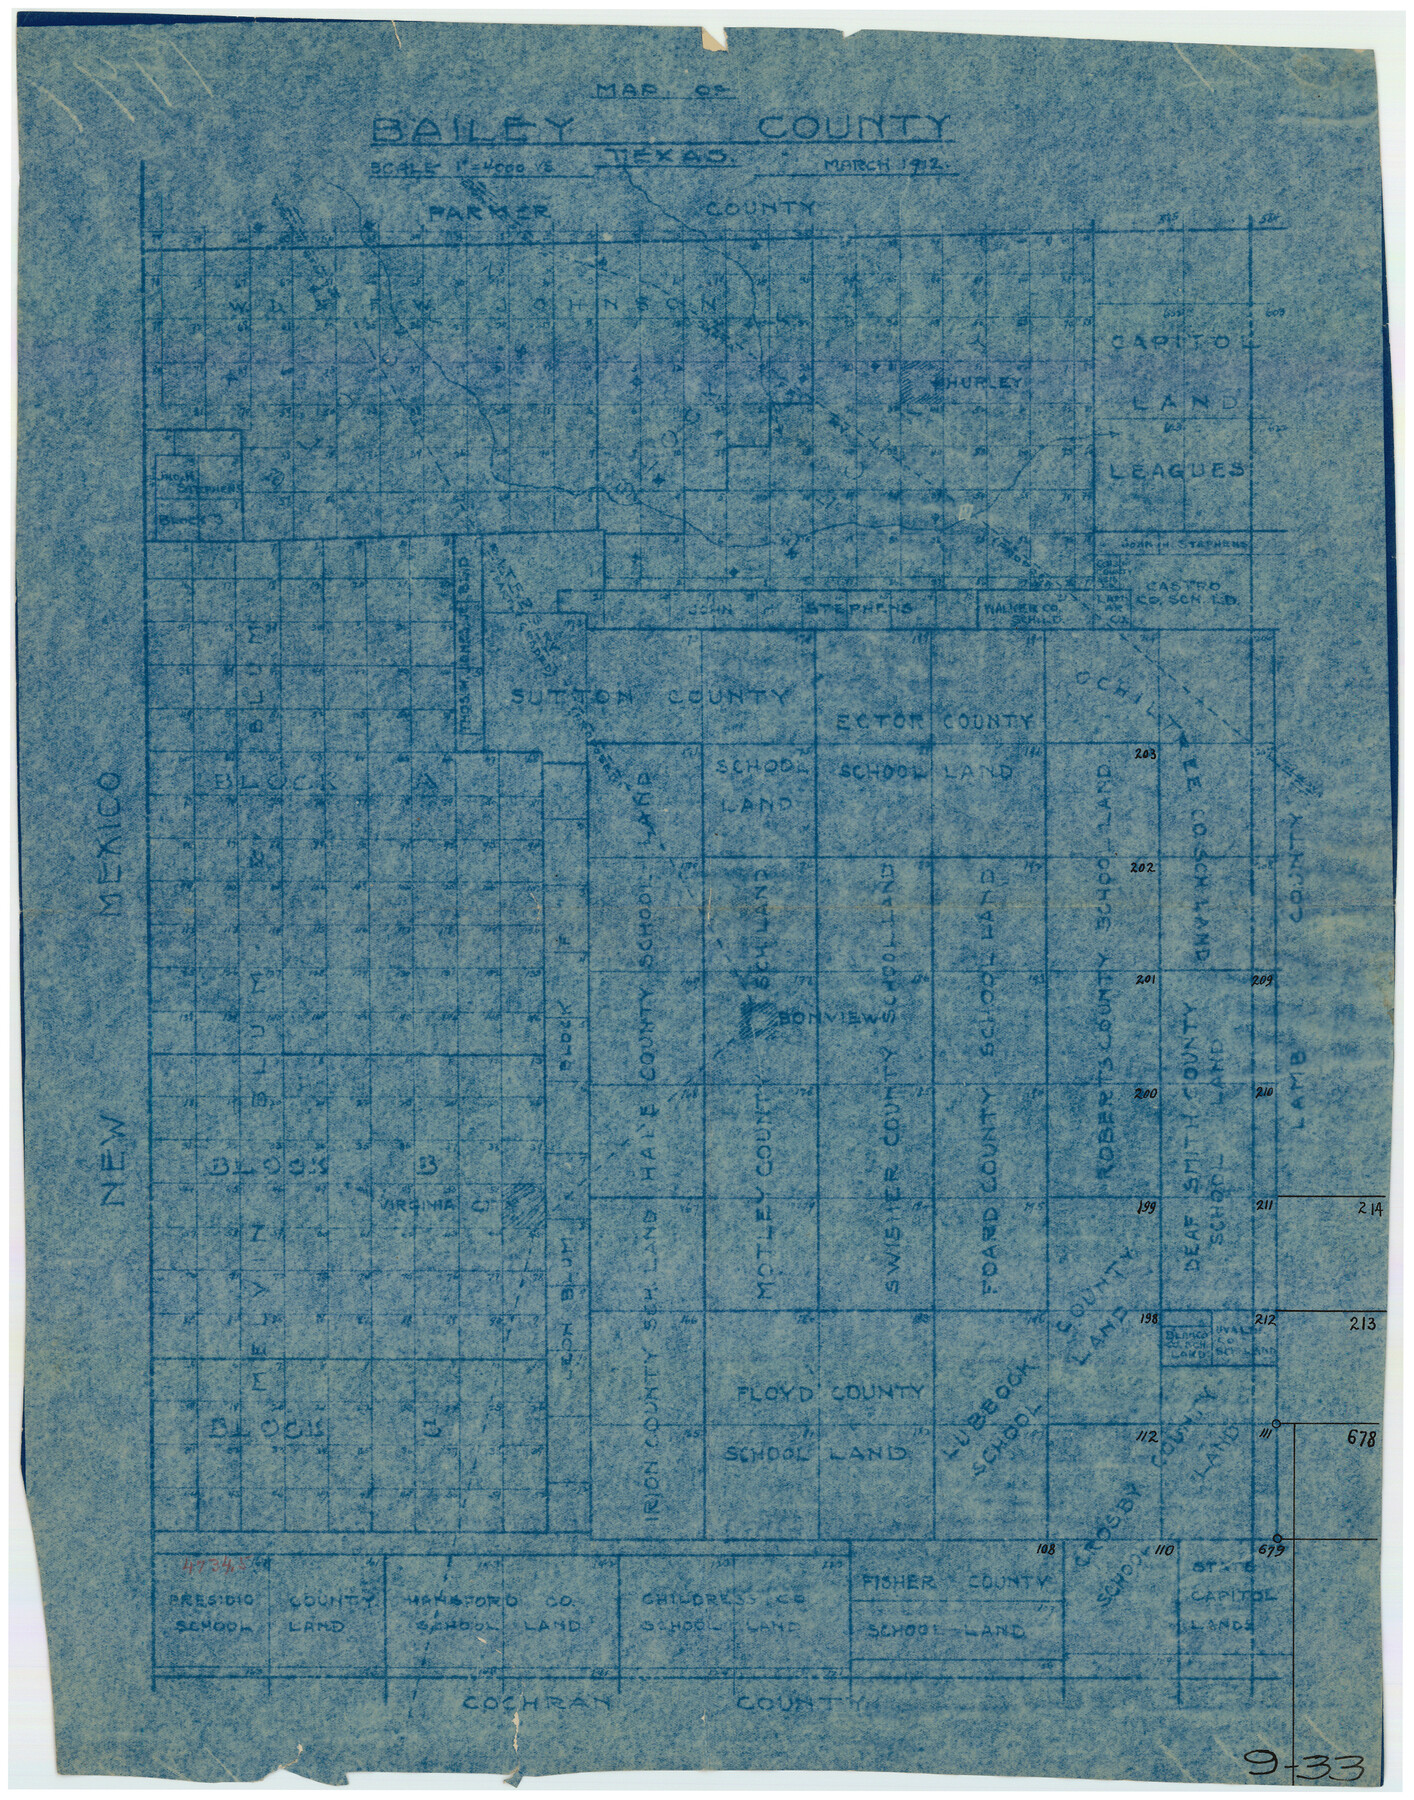 90248, Map of Bailey County, Texas, Twichell Survey Records